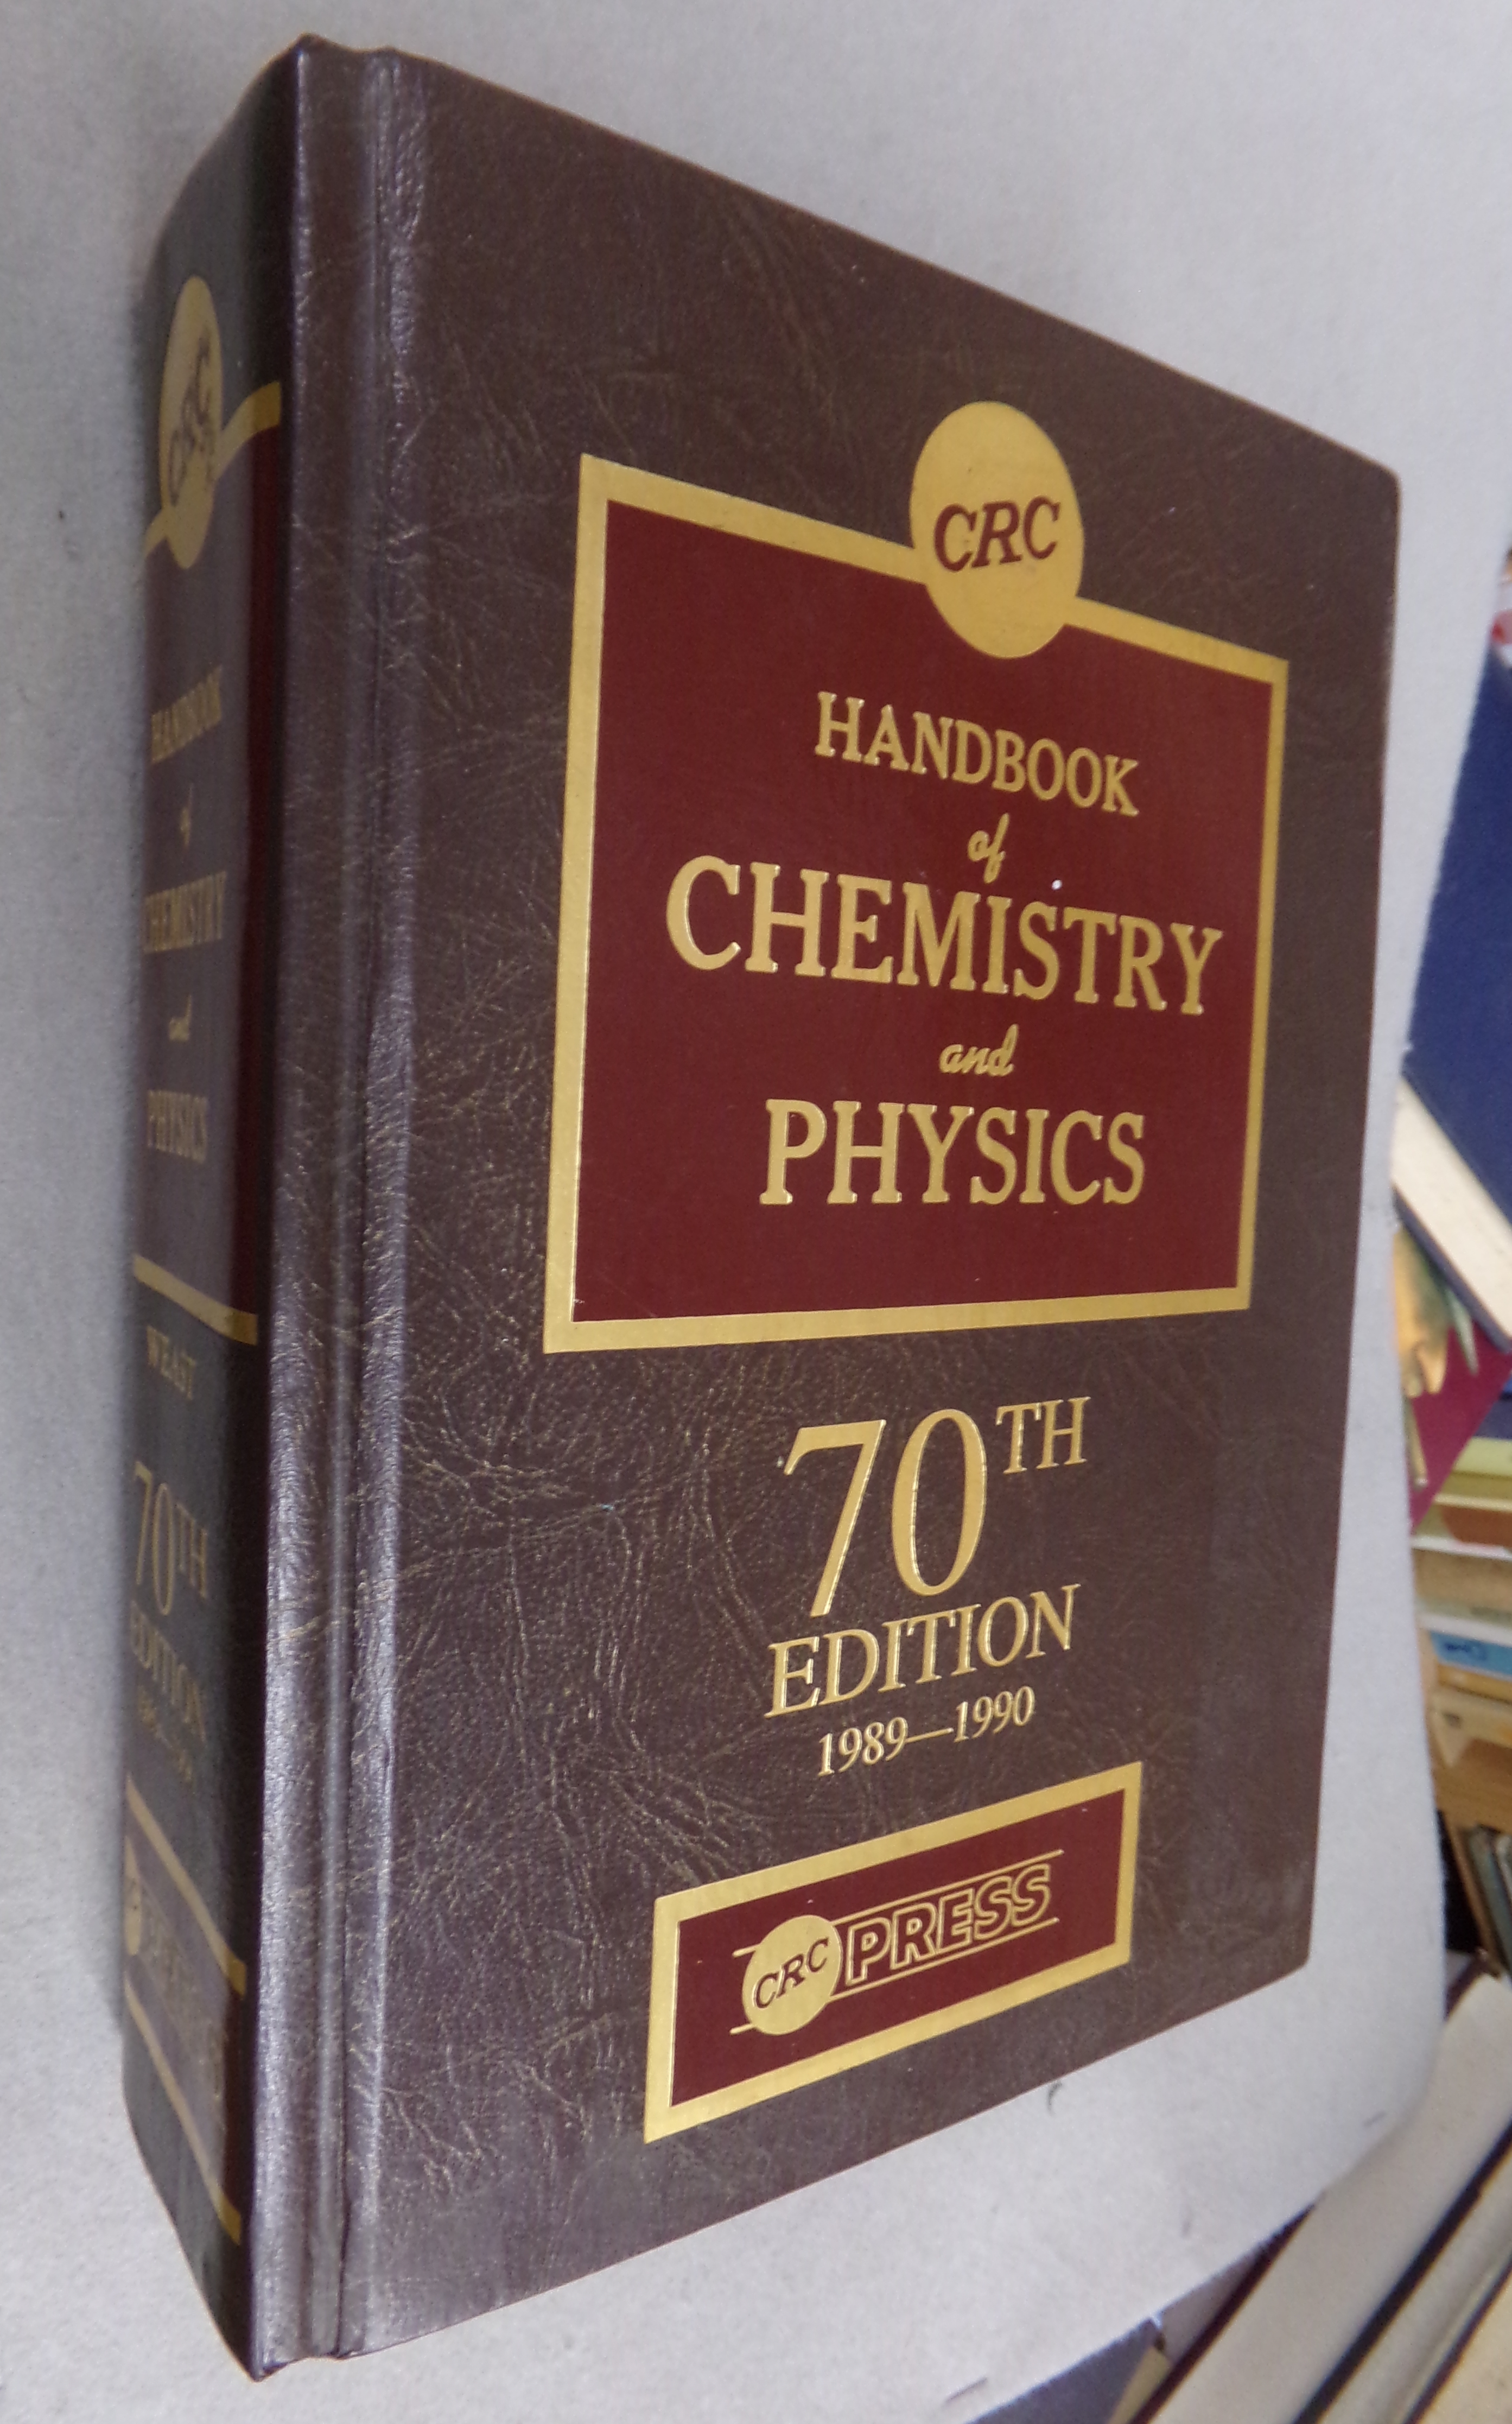 CRC Handbook of Chemistry and Physics: 70th Edition 1989-1990 - Weast, Robert C (Ed-In-Chief)